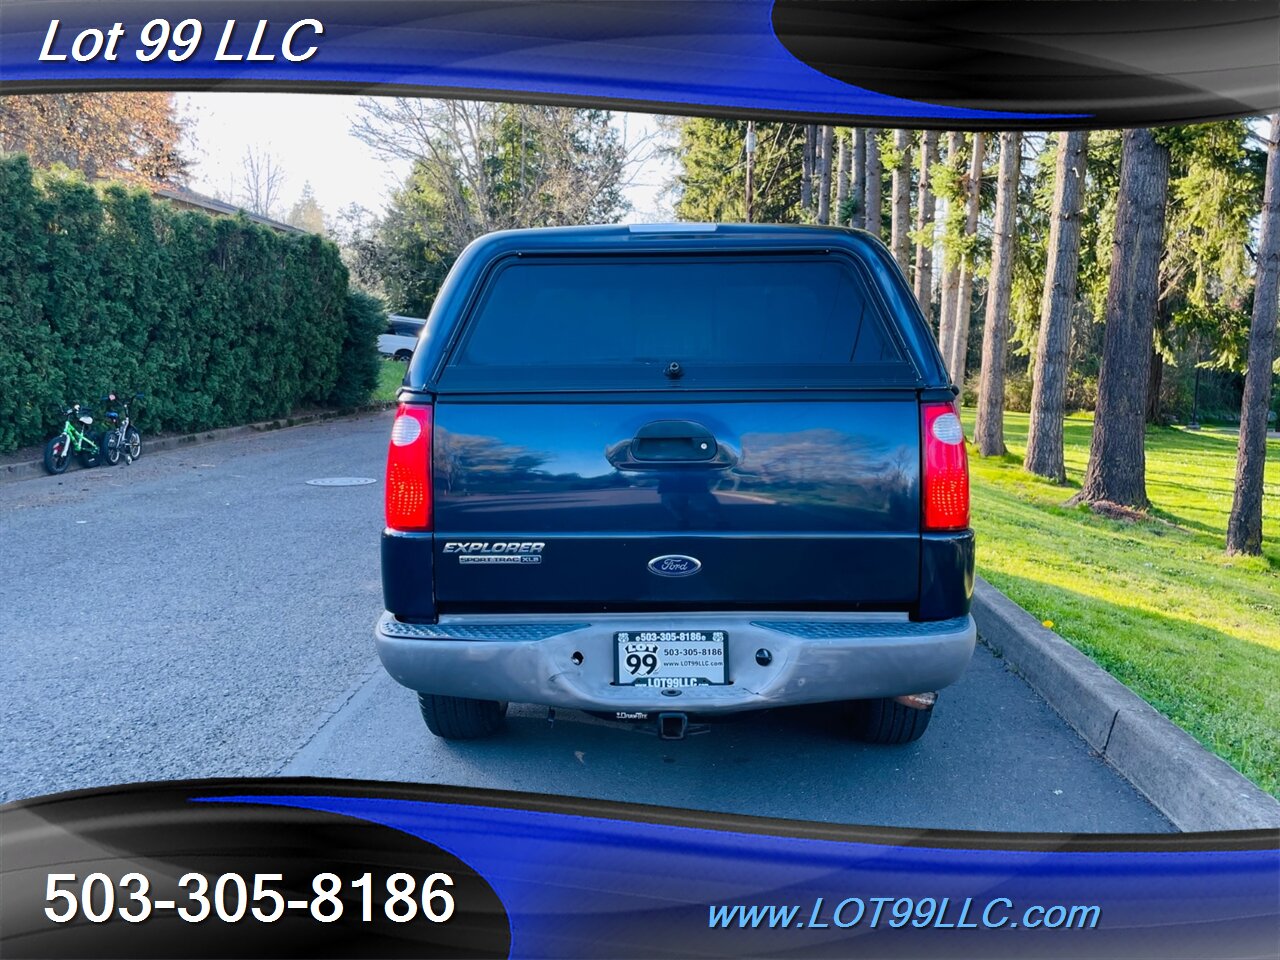 2003 Ford Explorer Sport Trac XLS 4x4  1-OWNER 117k  NEW TIRES  Canopy   - Photo 9 - Milwaukie, OR 97267